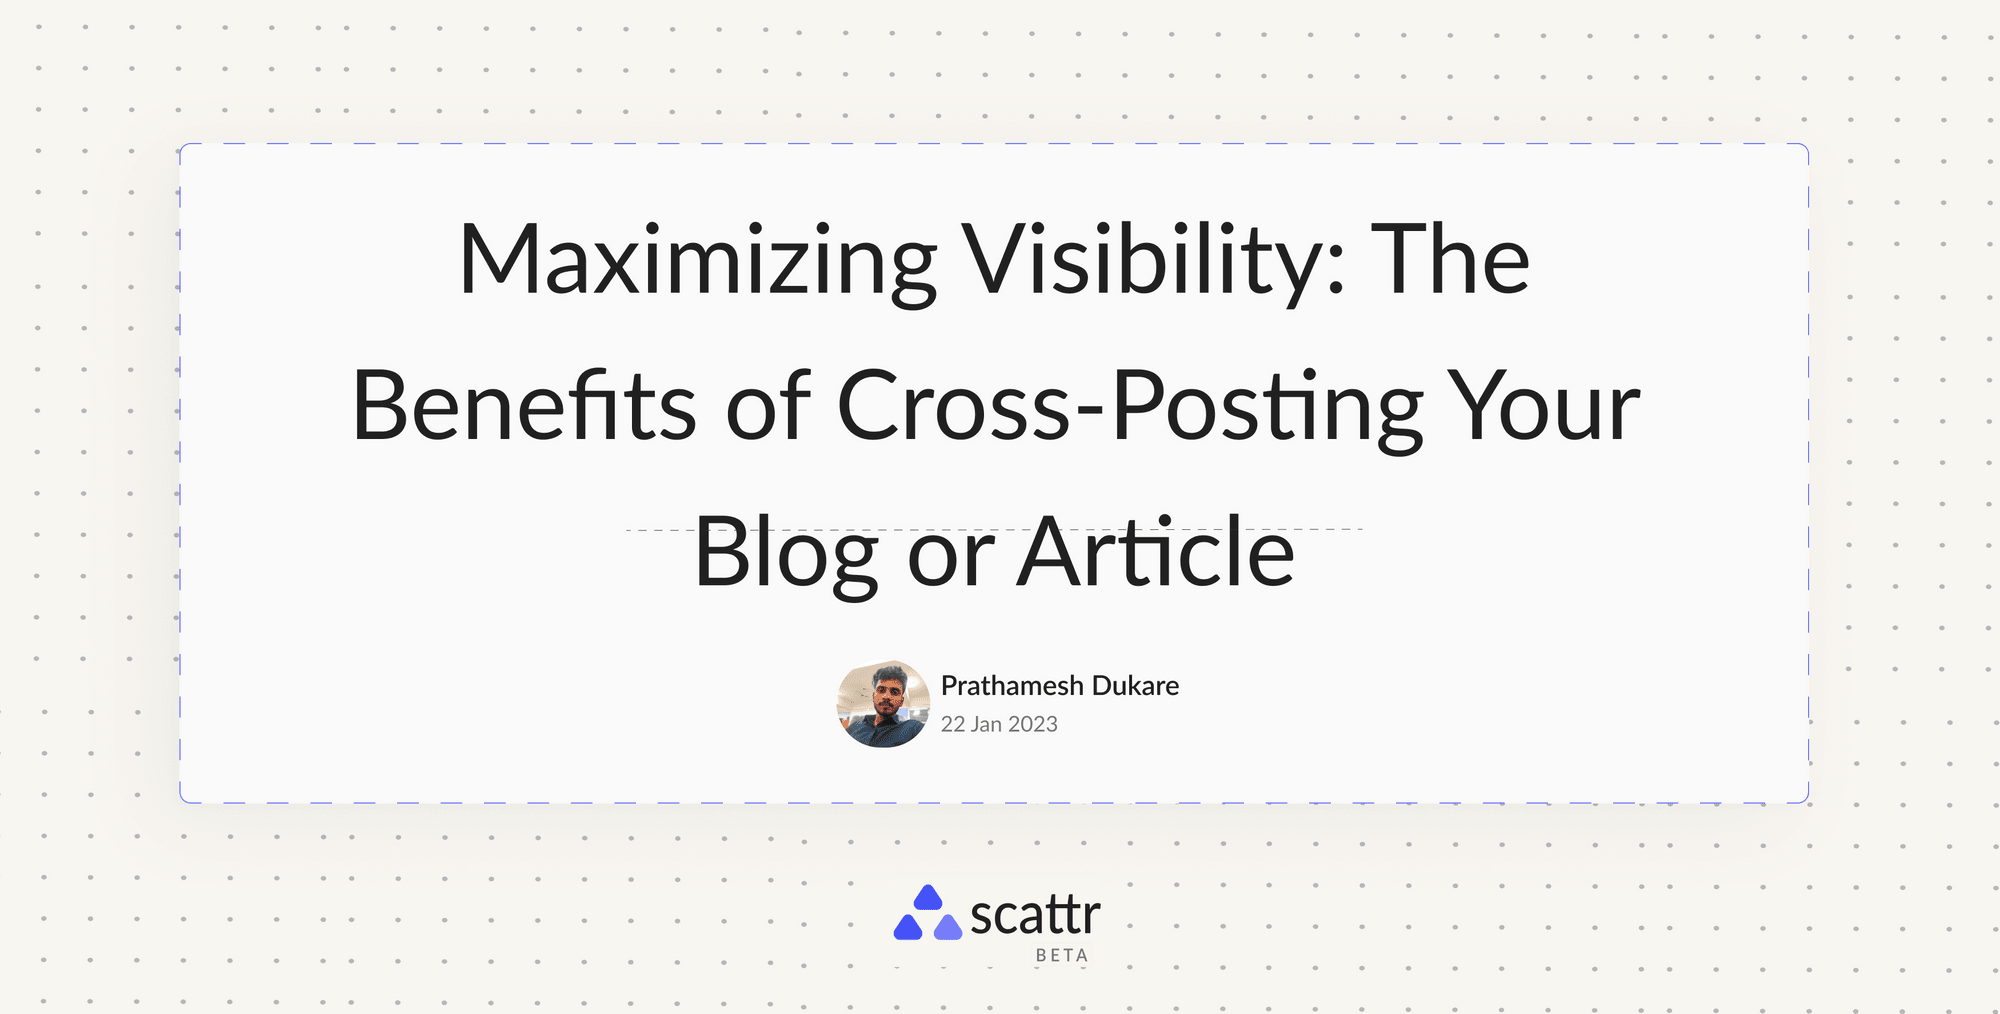 Maximizing Visibility: The Benefits of Cross-Posting Your Blog or Article